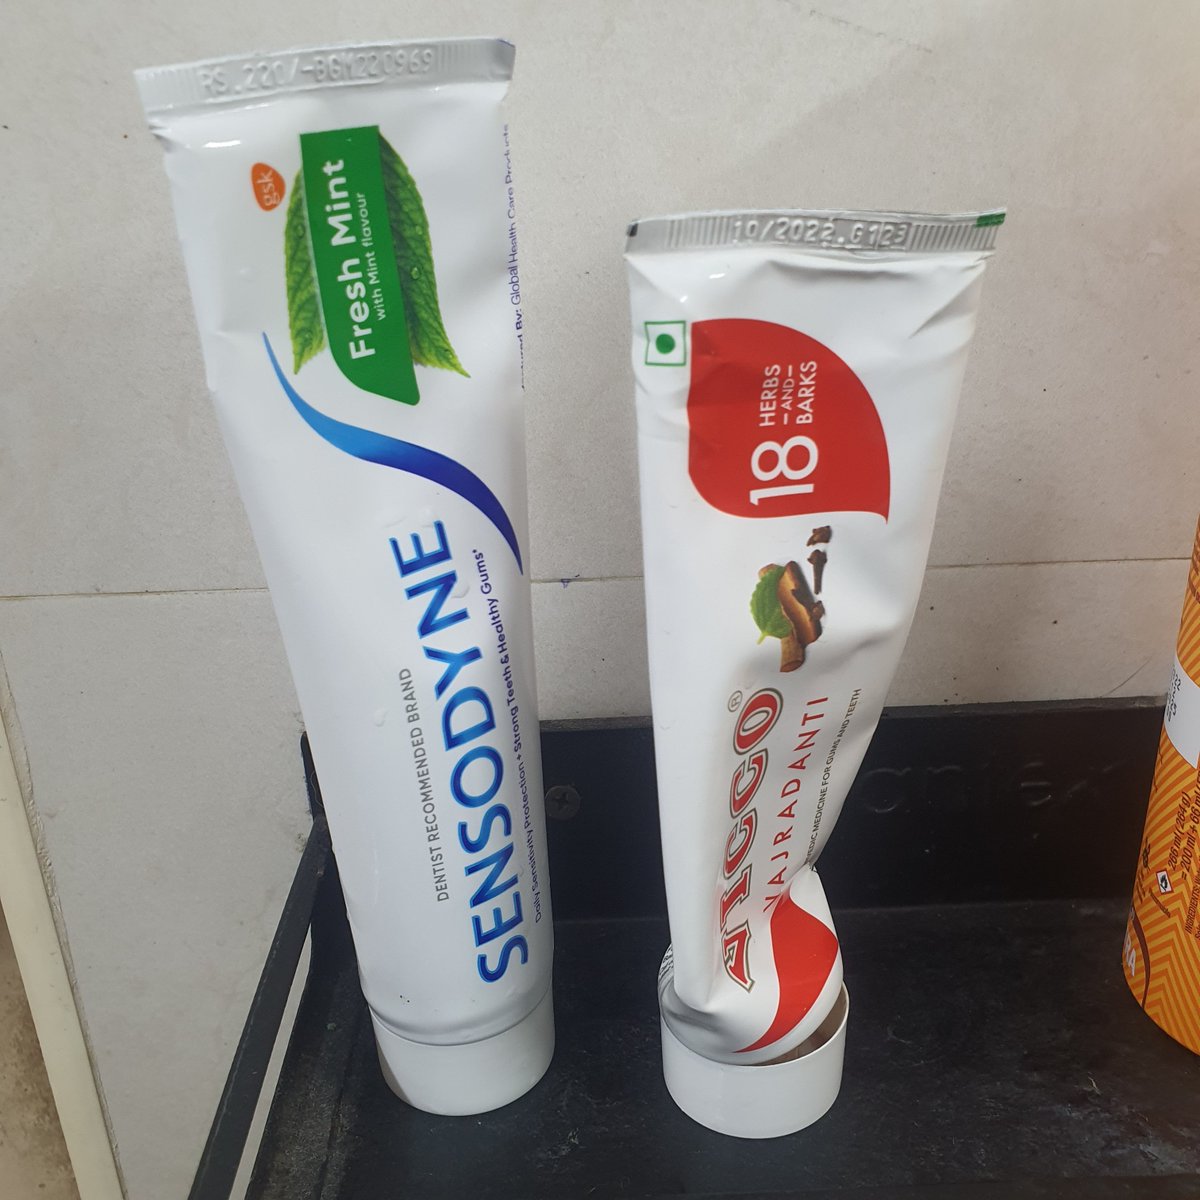 Psychology experts in my TL. 
Q1 - Tell me, which one belongs to a male and which to a female?
Q2 - Inference about the qualities of the user of each tube.

#Weekend #BrainExercise 
@ProfMKay @Dharmic_Jana @caustickonar @SaffronDalit @sirj